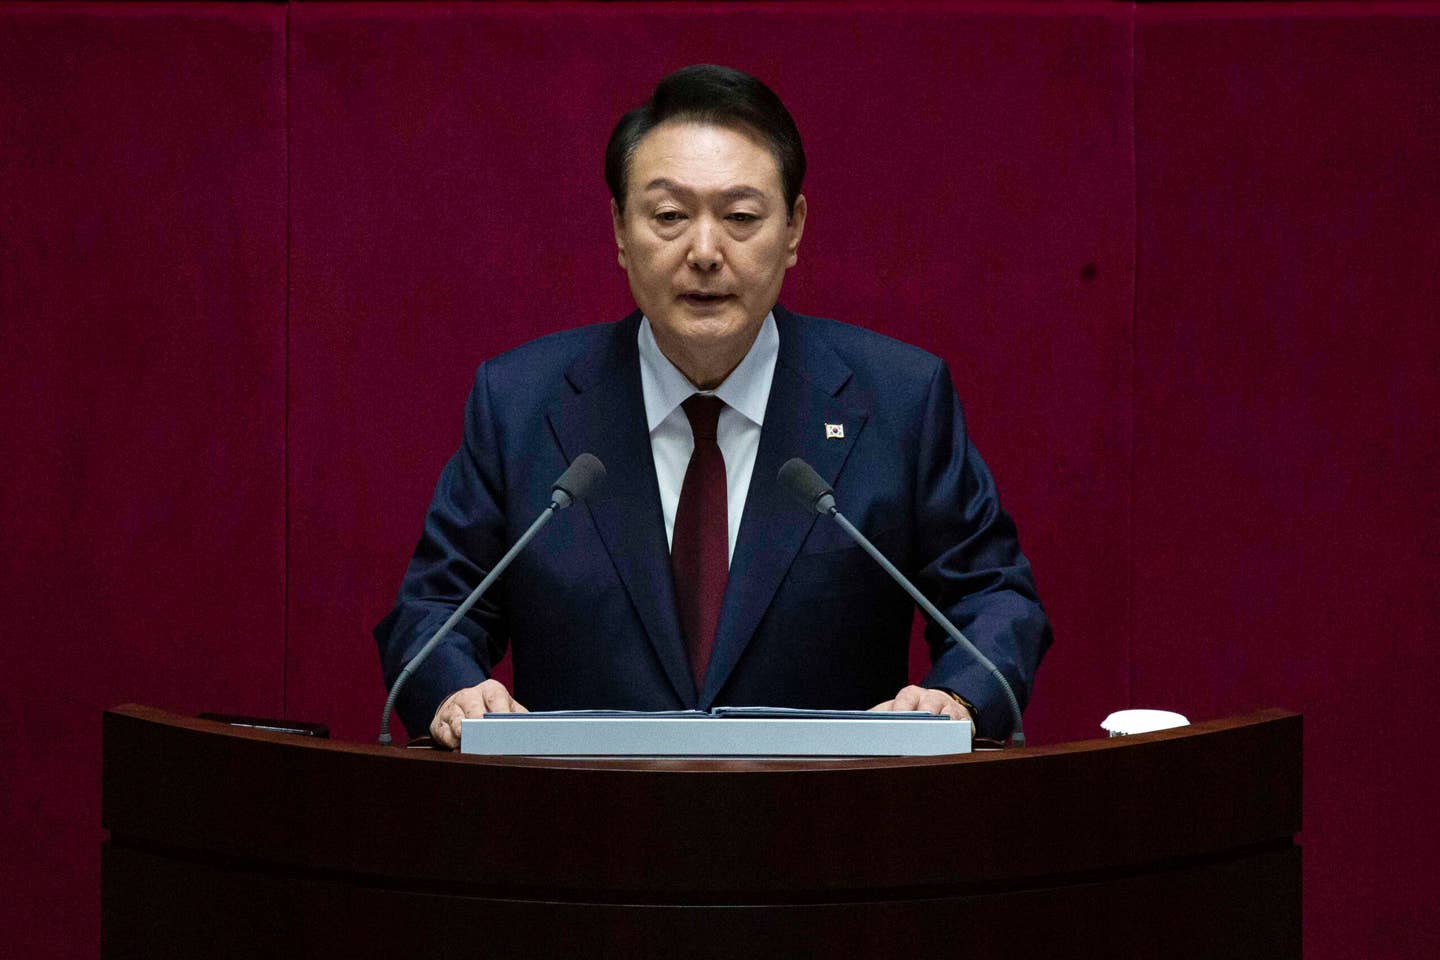 South Korean President Yoon Suk Yeol delivers a speech at the National Assembly in Seoul in October 2022. <em>Photo by JEON HEON-KYUN/POOL/AFP via Getty Images</em>